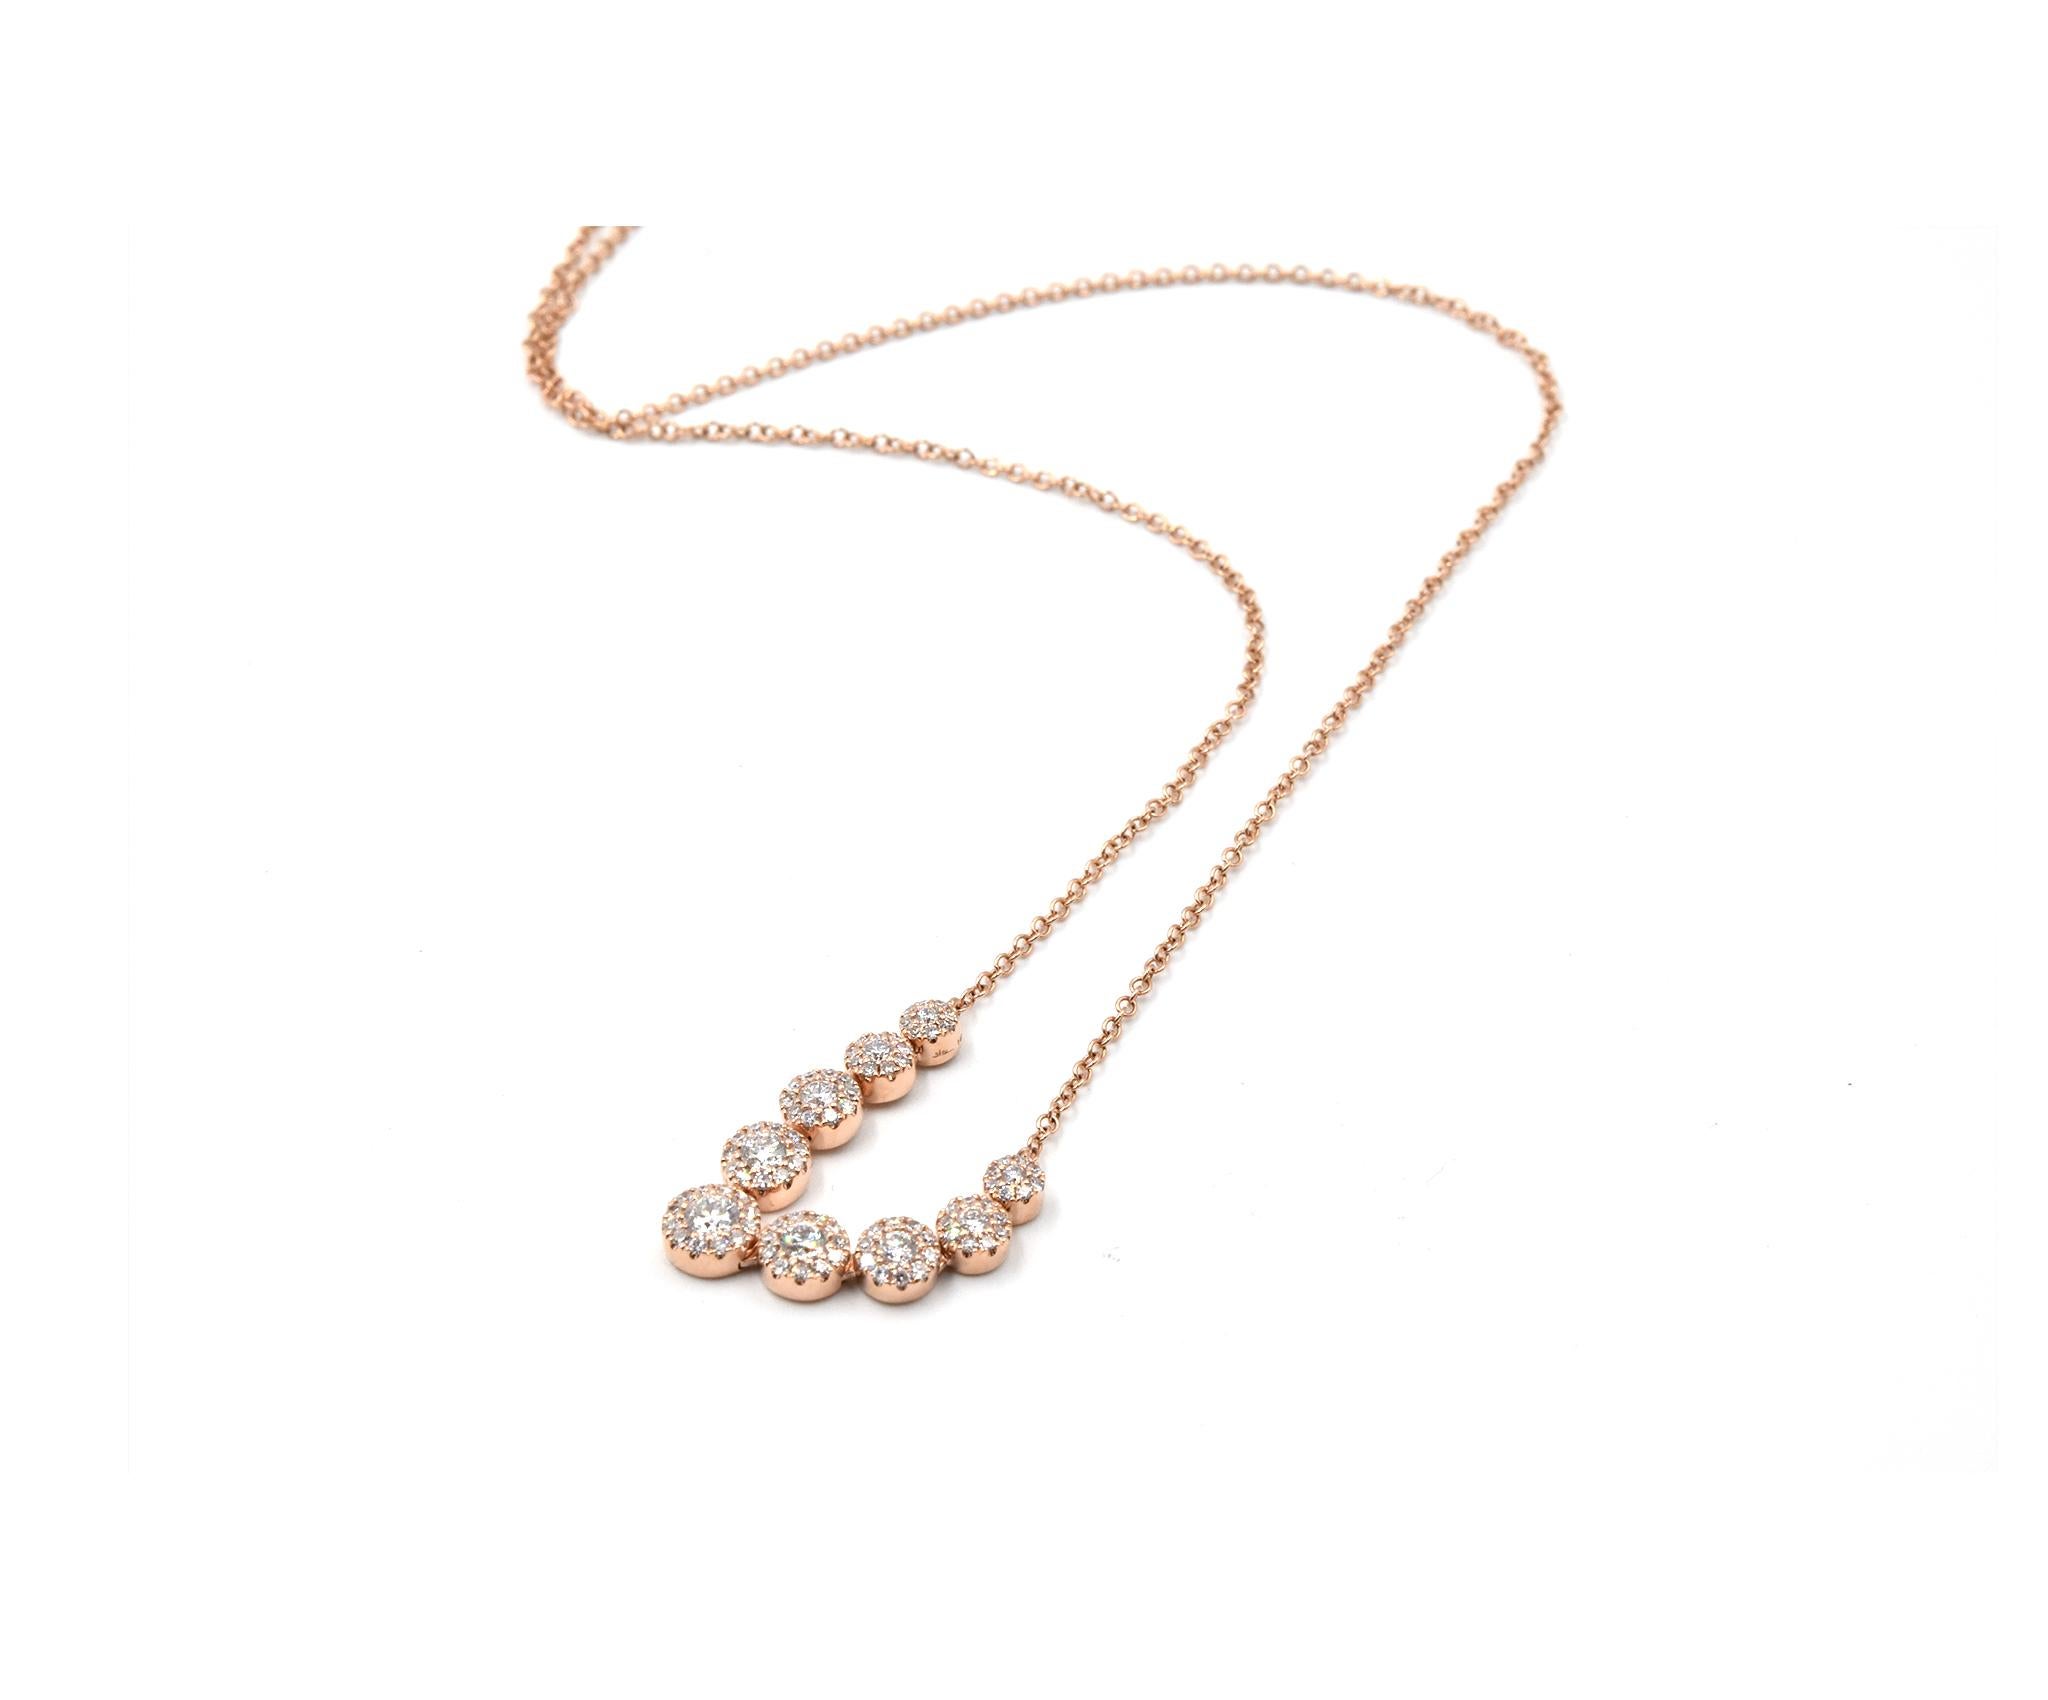 Designer: custom design
Material: 14k Rose Gold
Diamonds: 88 round diamond = .56cttw
Color: G	
Clarity: VS
Dimensions: necklace is 18-inch long
Weight: 3.07 grams	
